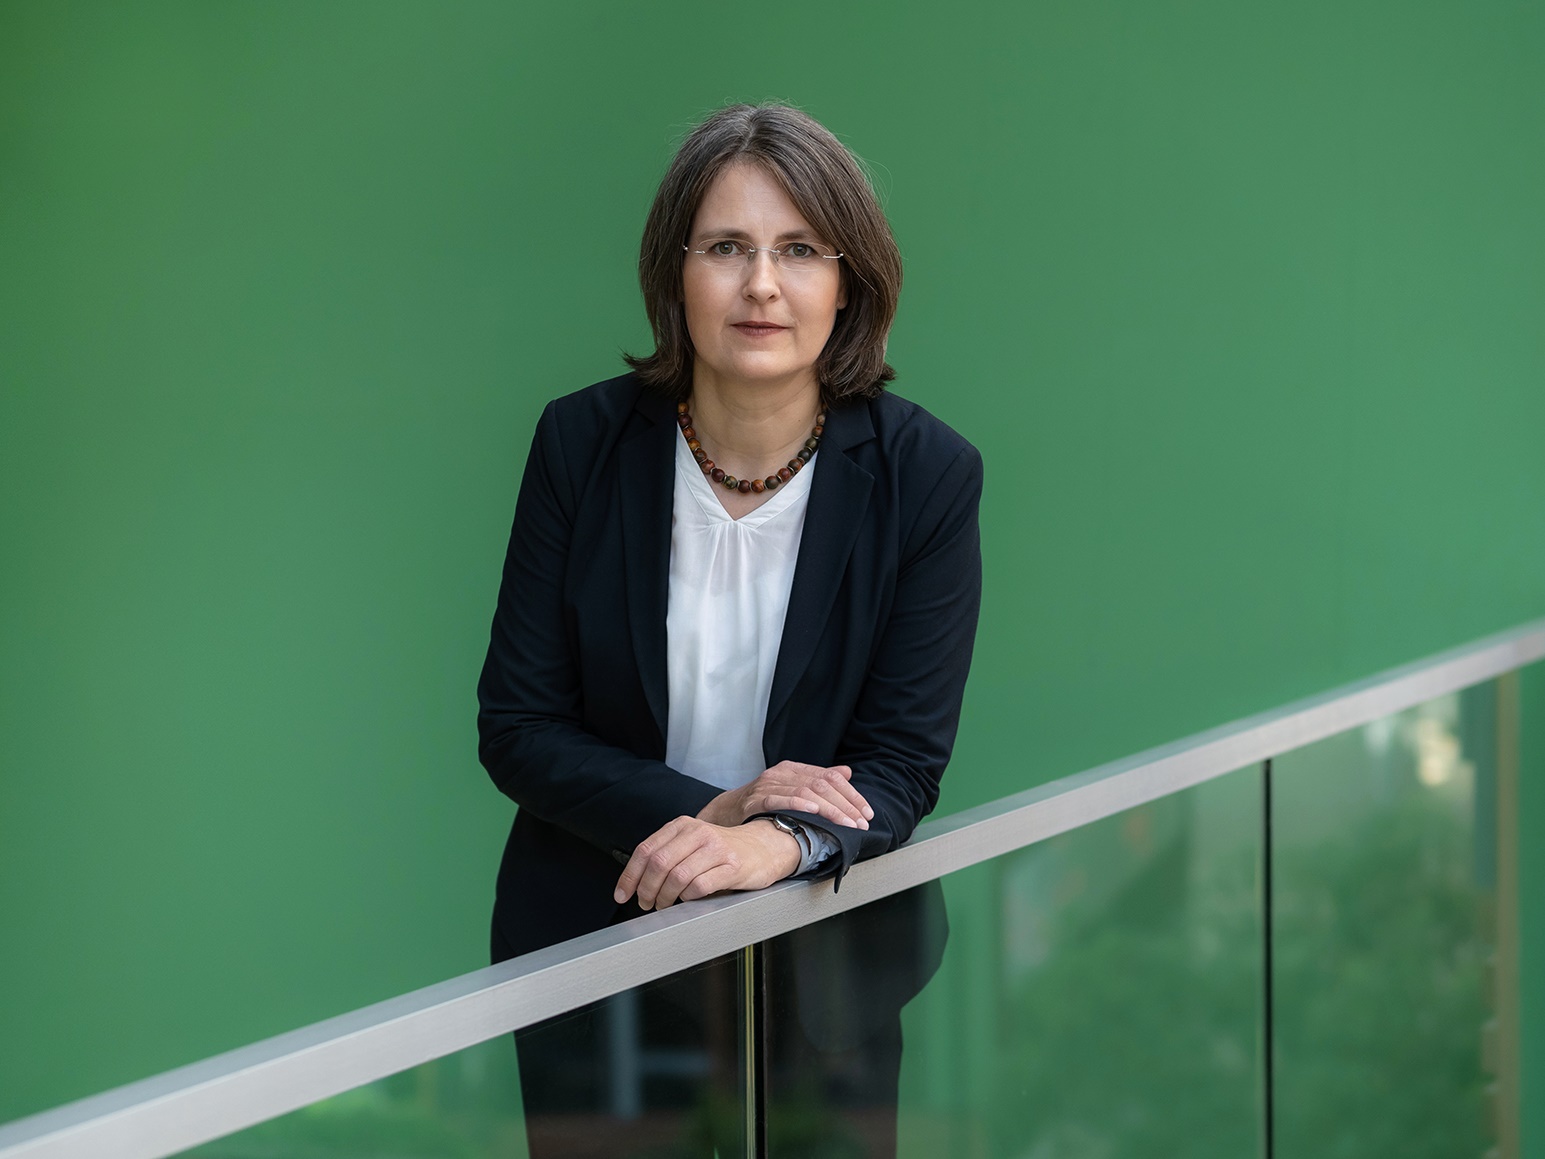 Dr. Claudia Röhl leaning on a stair railing in front of green background